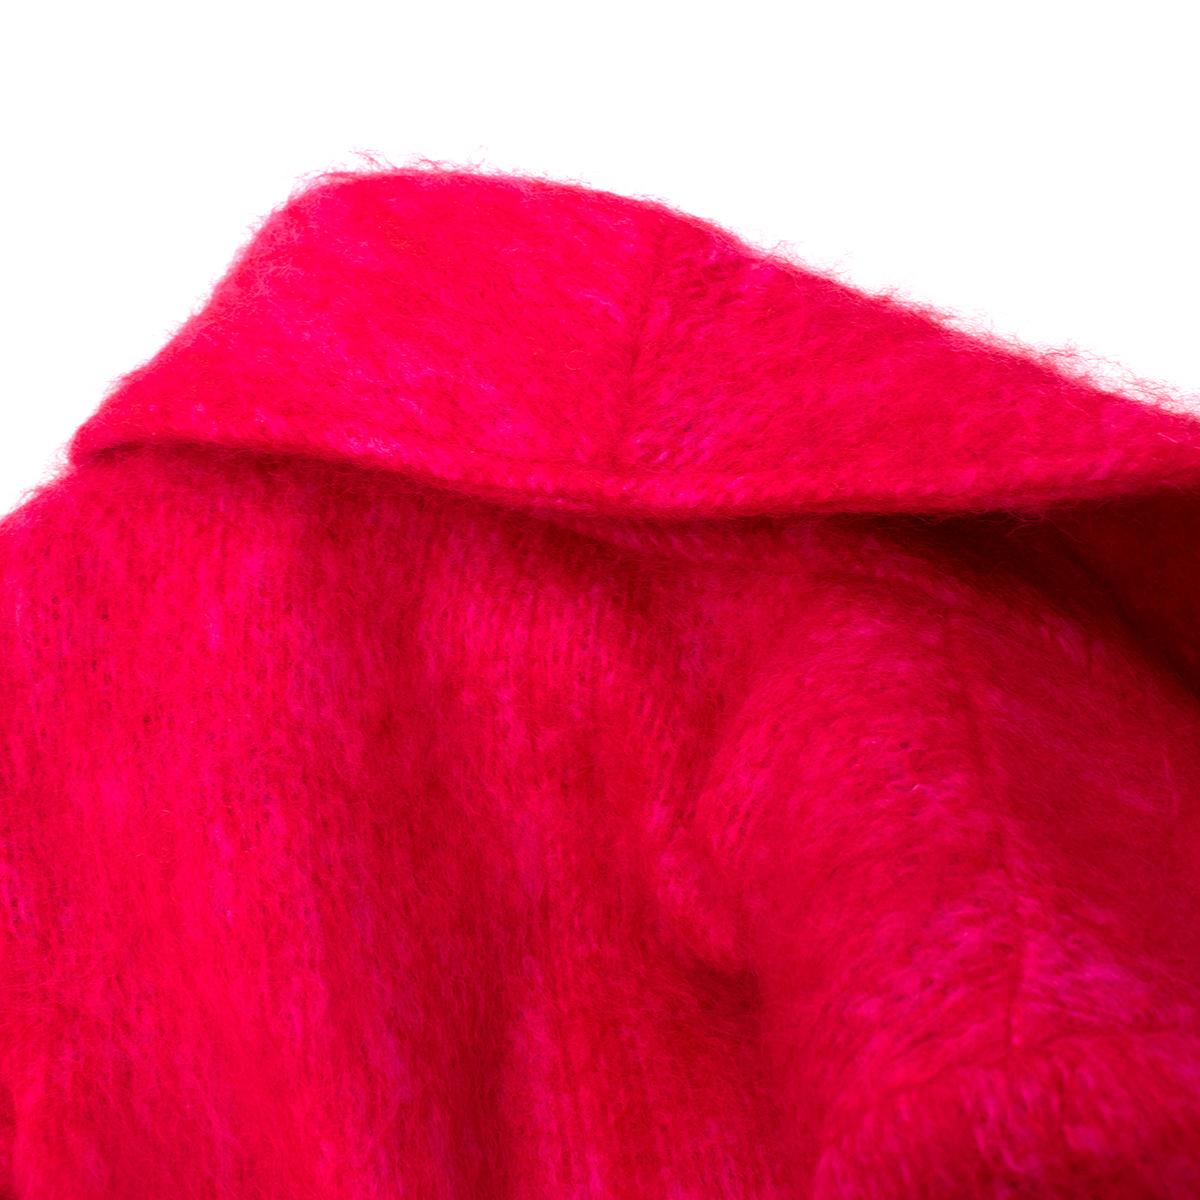 Paper London Red & Pink Mohair Wool Blend Coat - US 4 For Sale 1